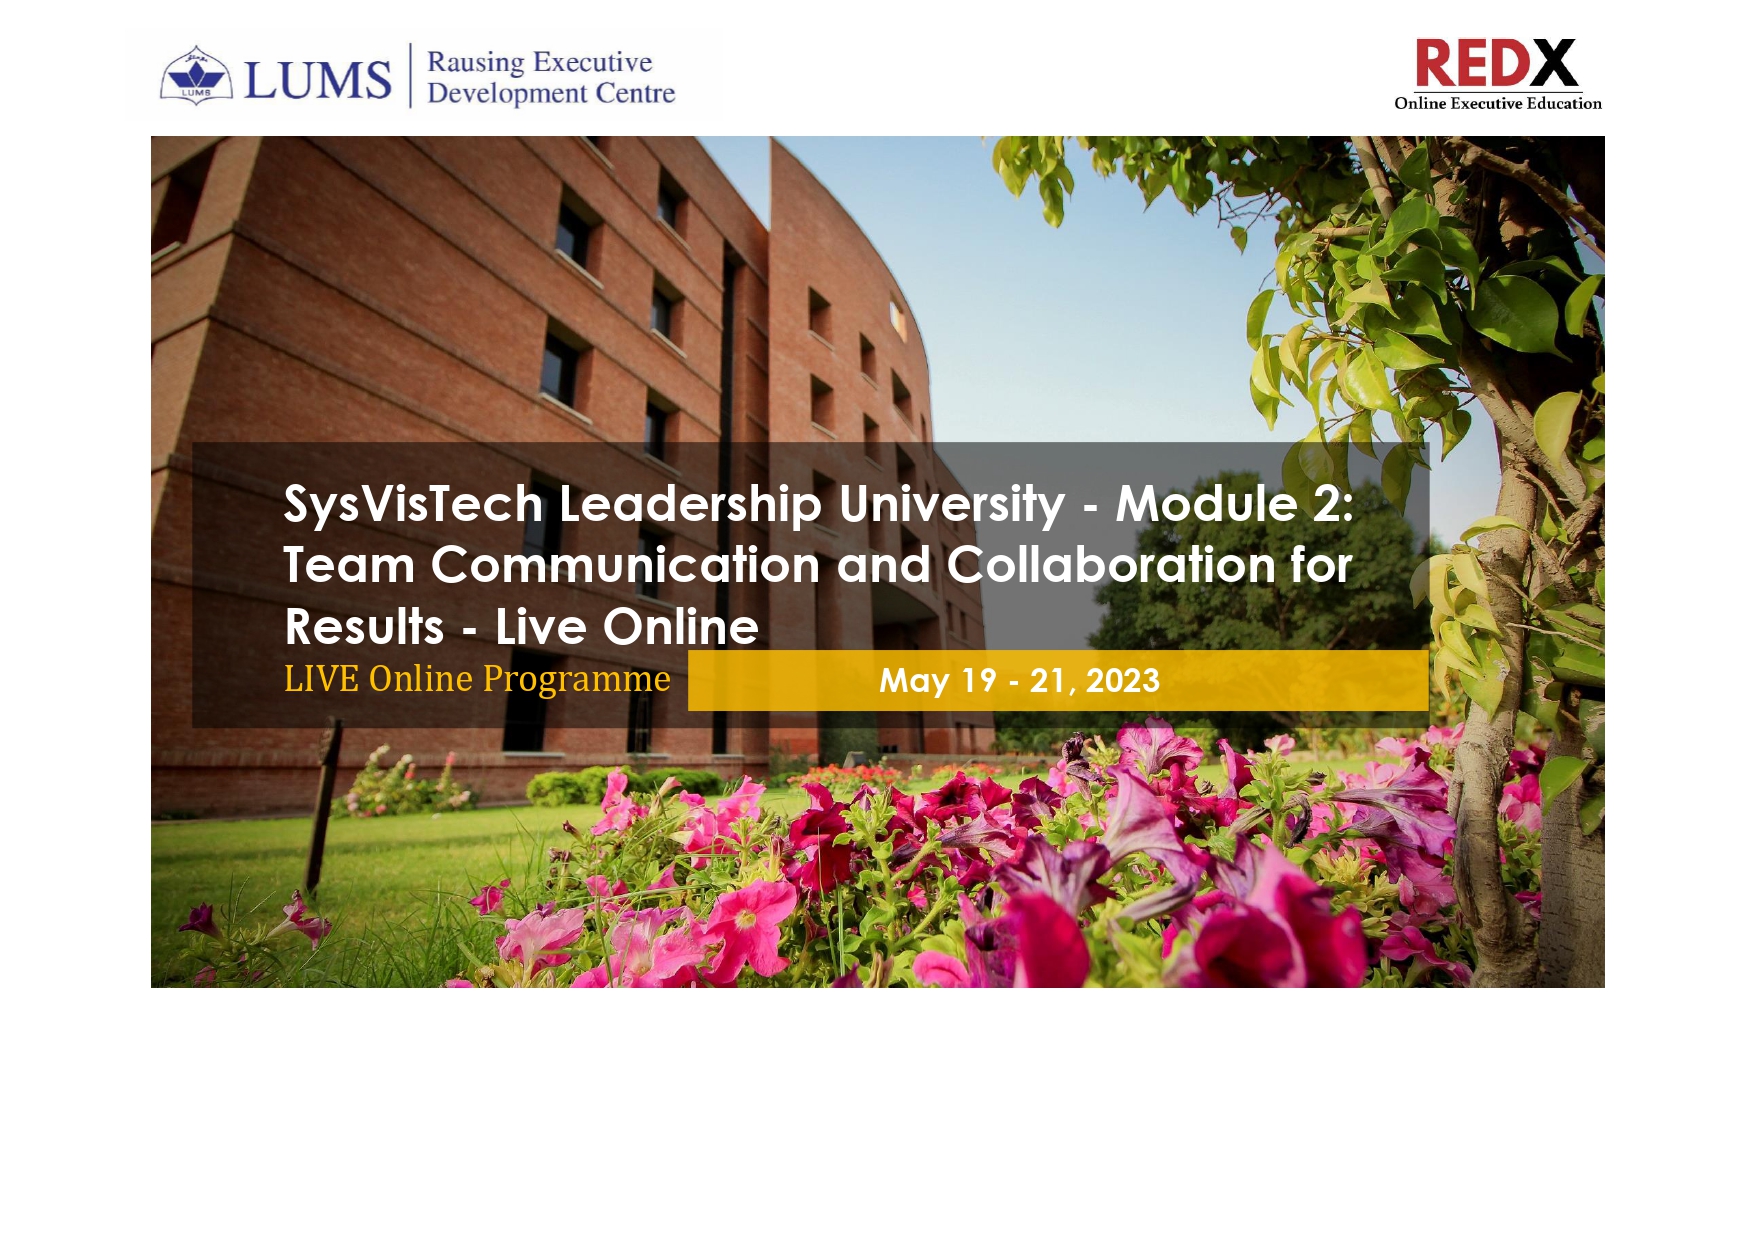 SysVisTech Leadership University - Module 2: Team Communication and Collaboration for Results - Live Online